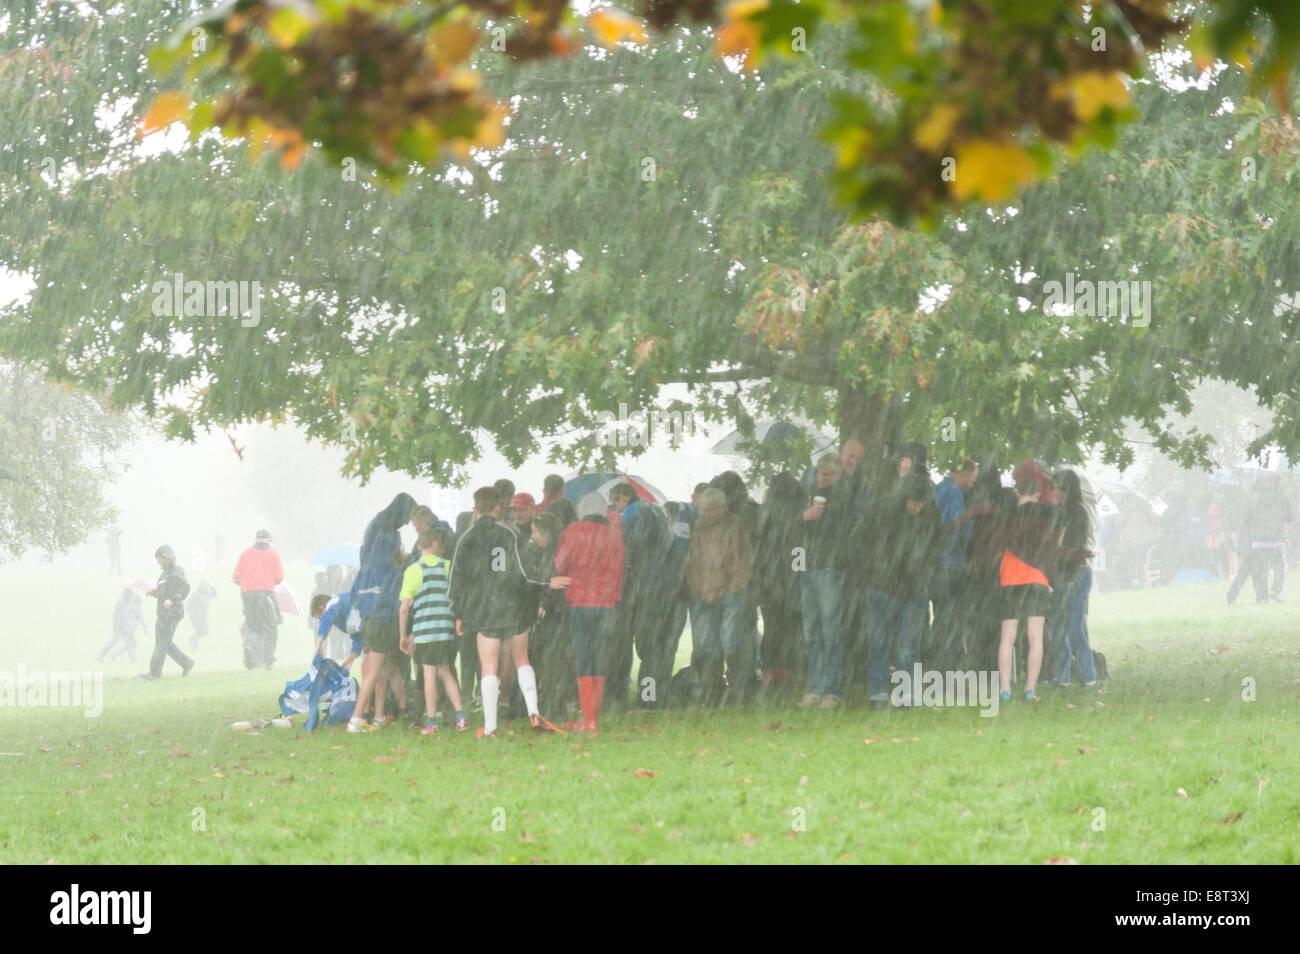 Desperate measures to keep dry as extremely heavy downpour of rain and hail causes people crowds to shelter under trees Stock Photo